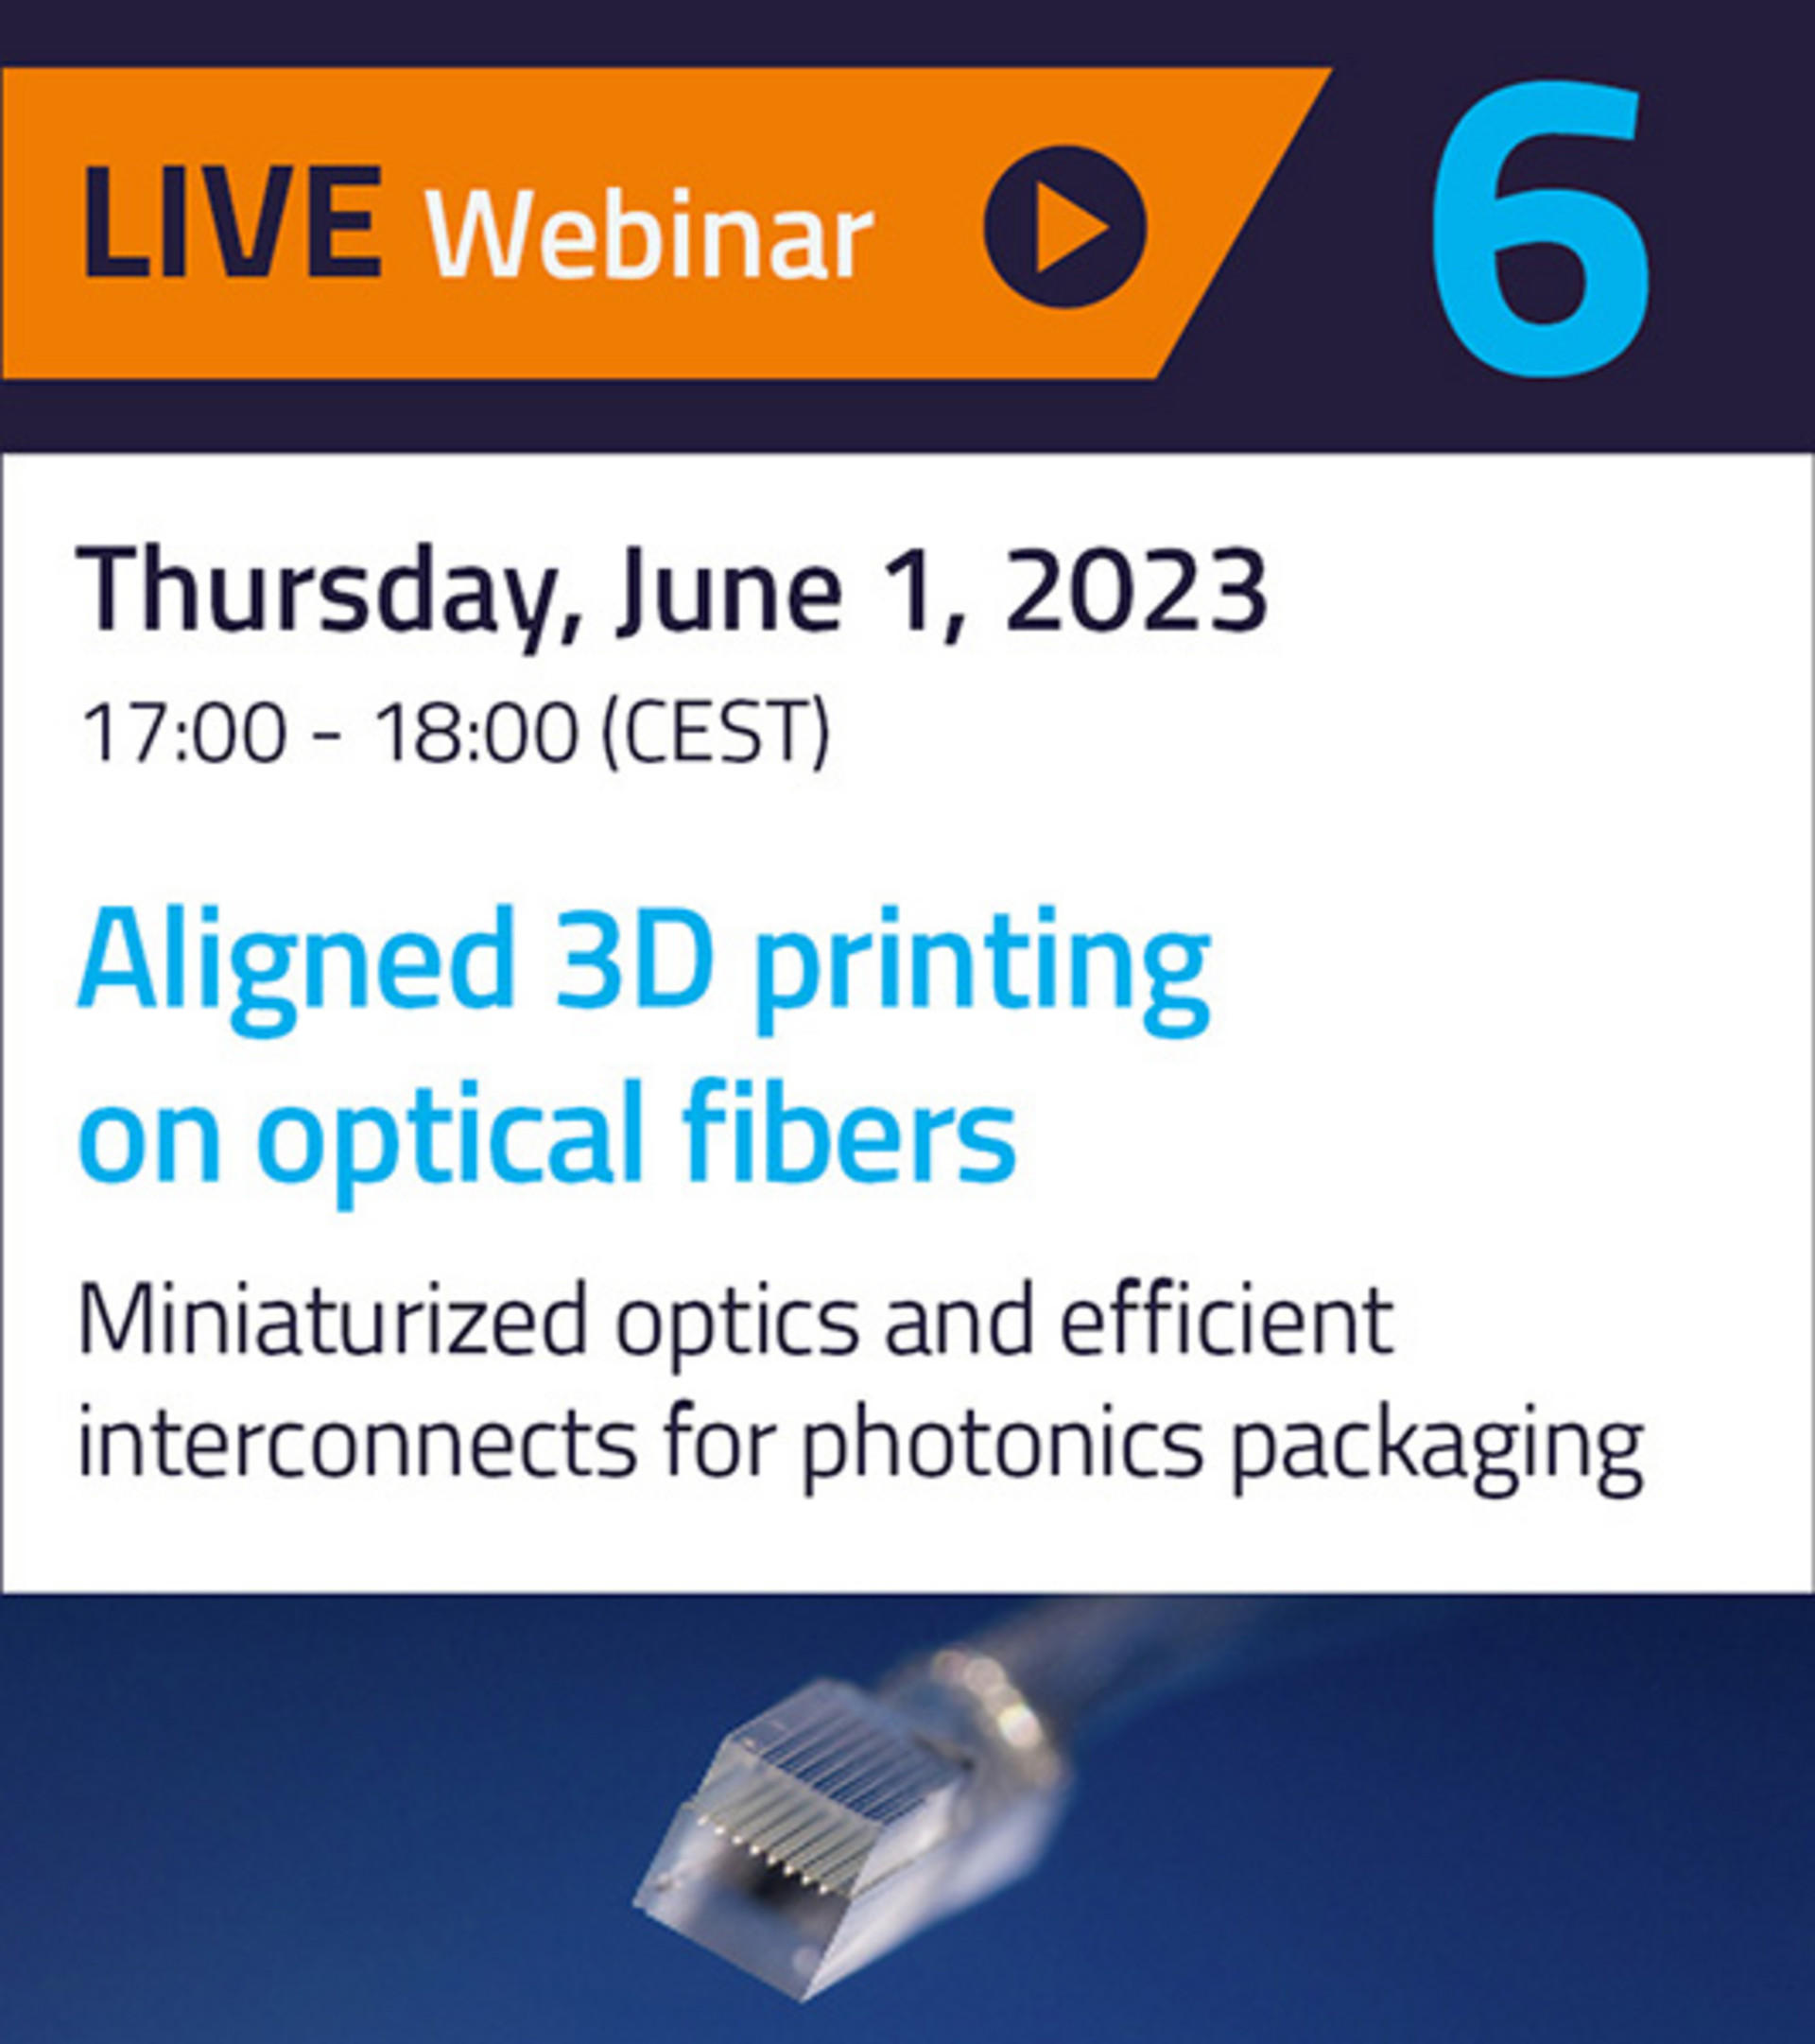 Webinar on aligned 3D printing on fibers on June 01, 2023 with Dr. Simon Thiele, Jeroen Duis and Dr. Stephan Dottermusch